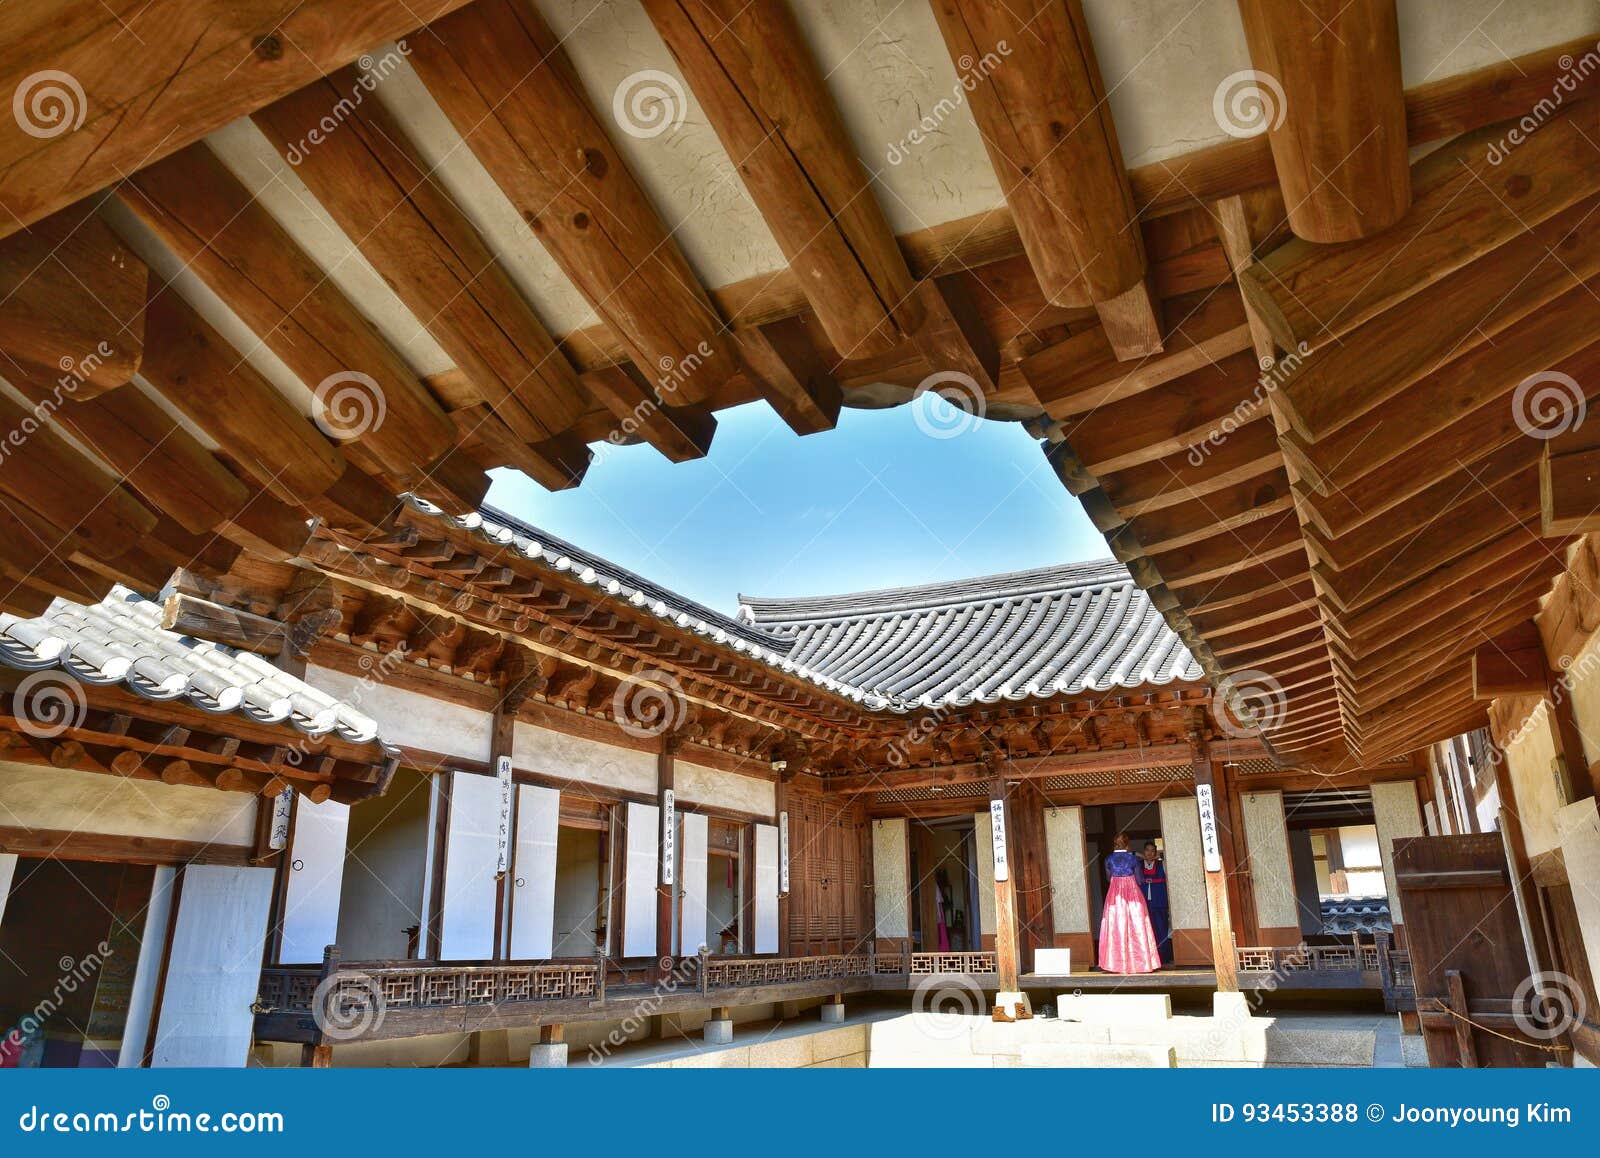 Traditional Korean Decor Of Village House, Seoul, South Korea. Stock Photo,  Picture and Royalty Free Image. Image 178858371.